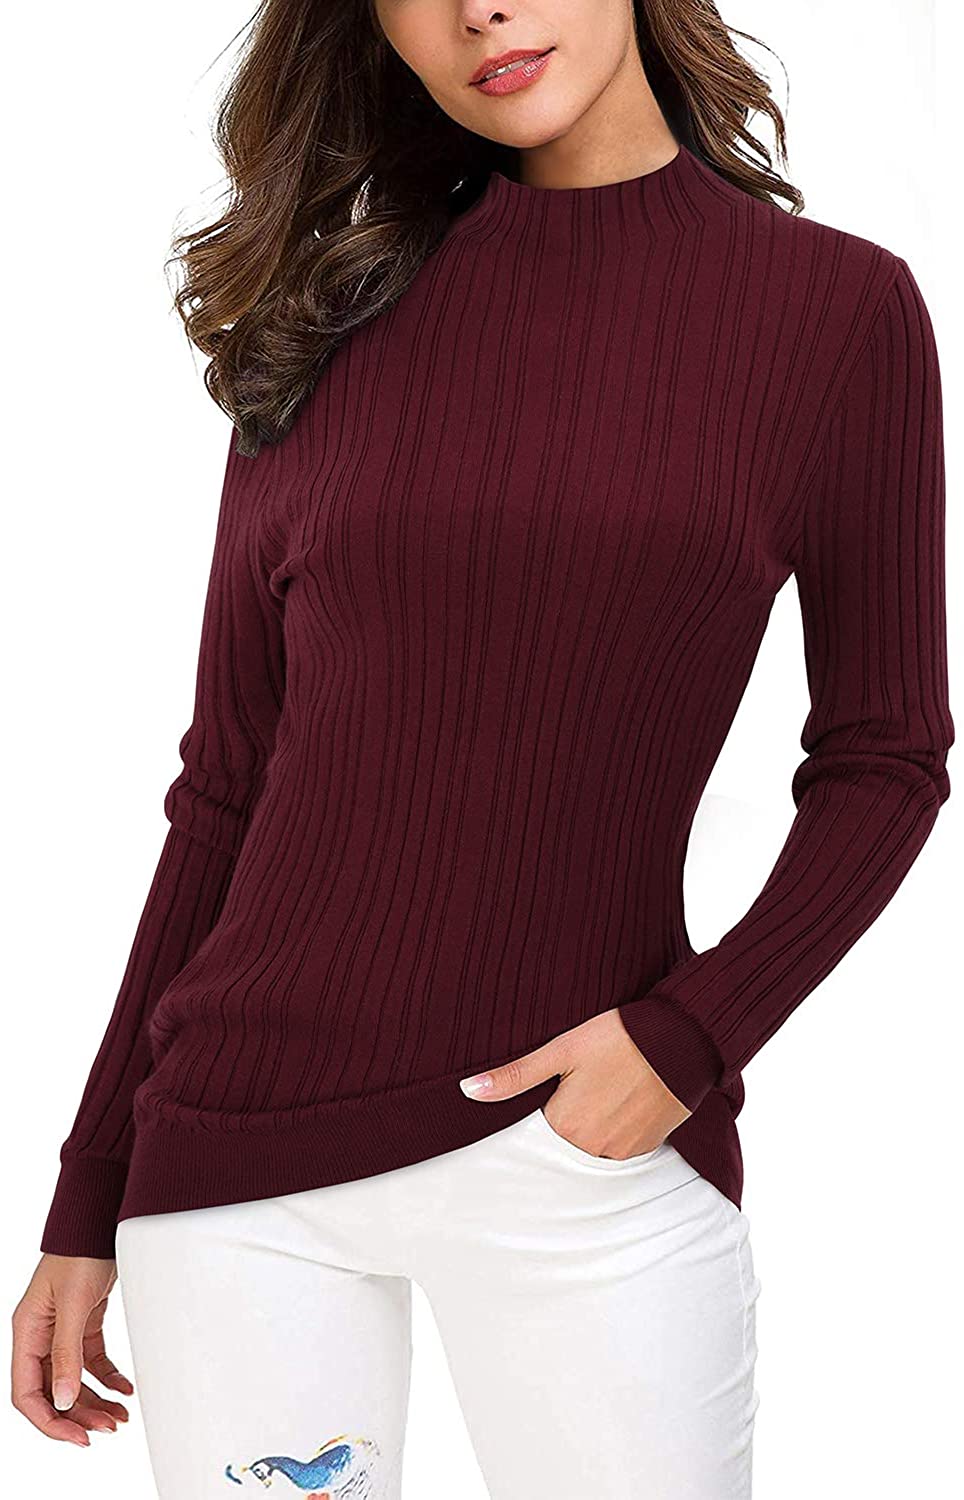 OUGES Women's Lightweight Stretchy Long Sleeve Pullover Cable Knit Mock Turtleneck Sweater